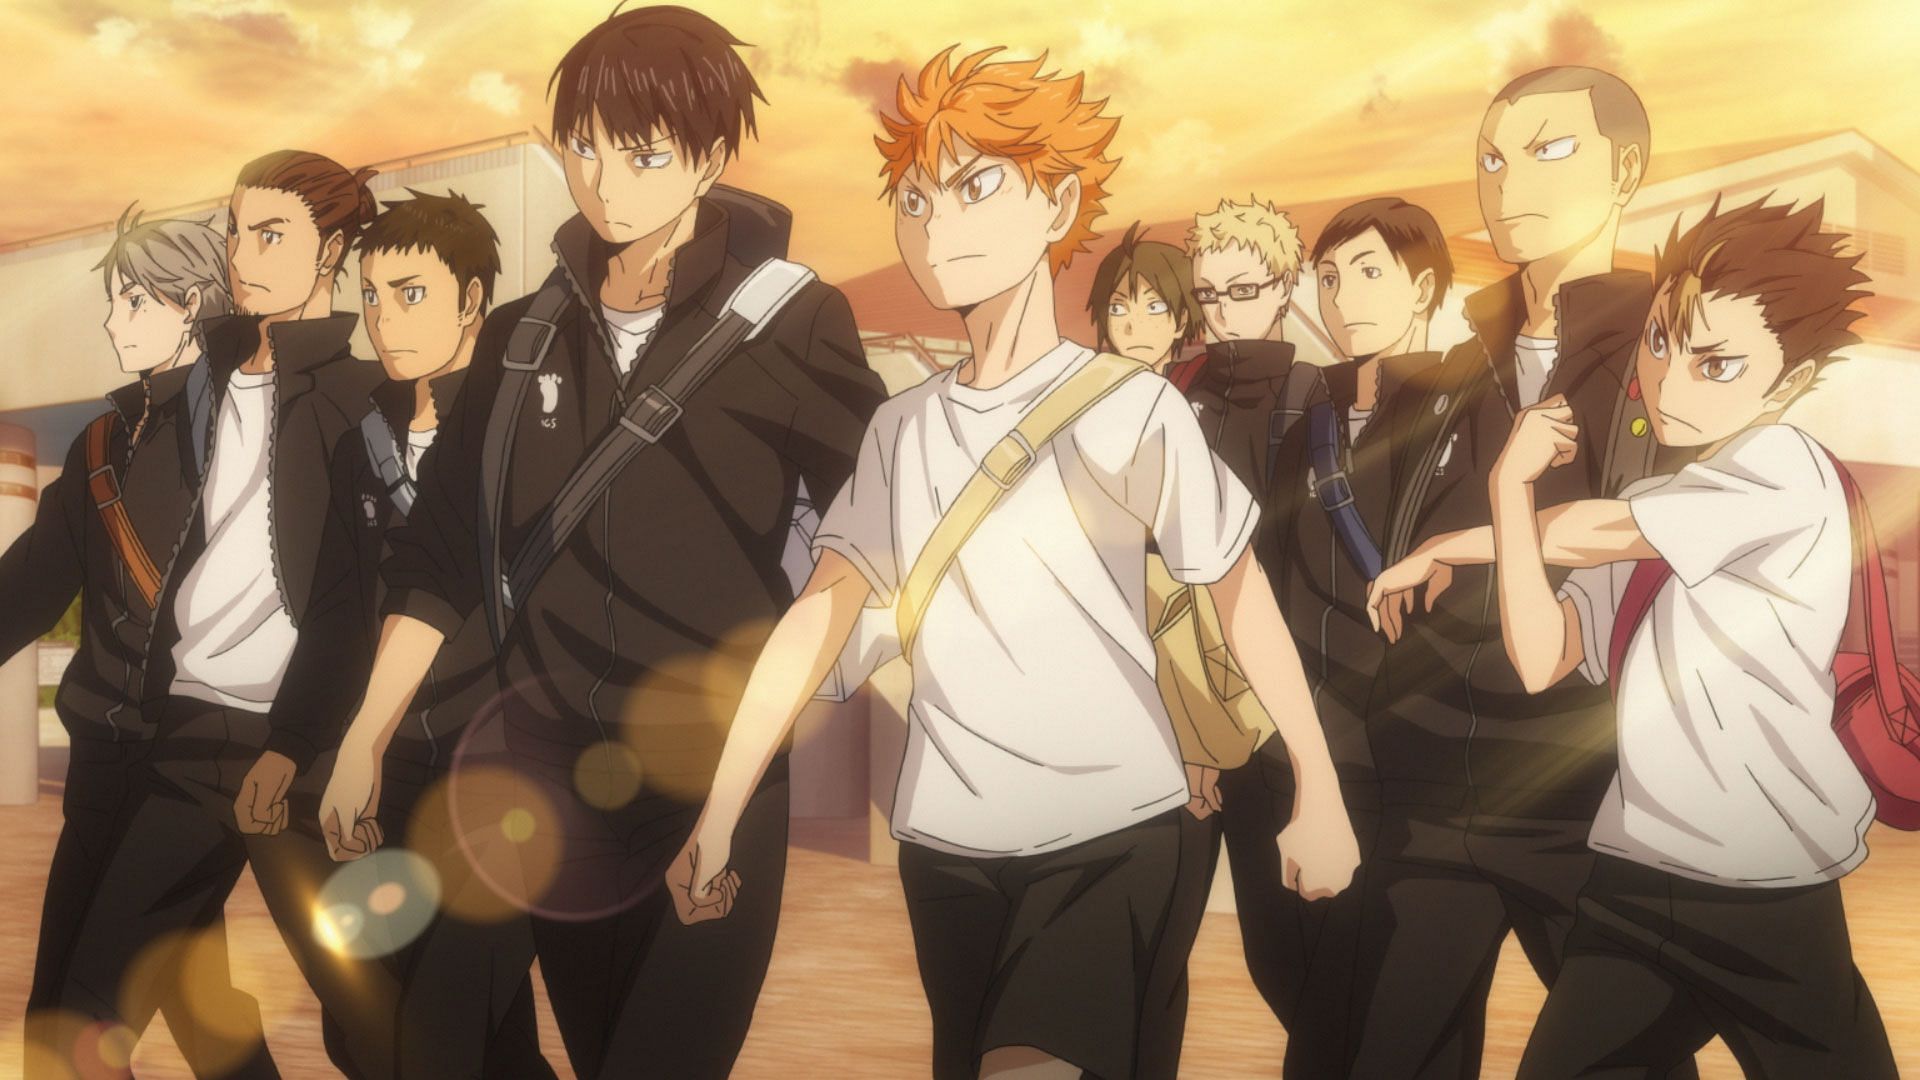 Haikyuu!! prepares to launch 3 new videos to appease fans